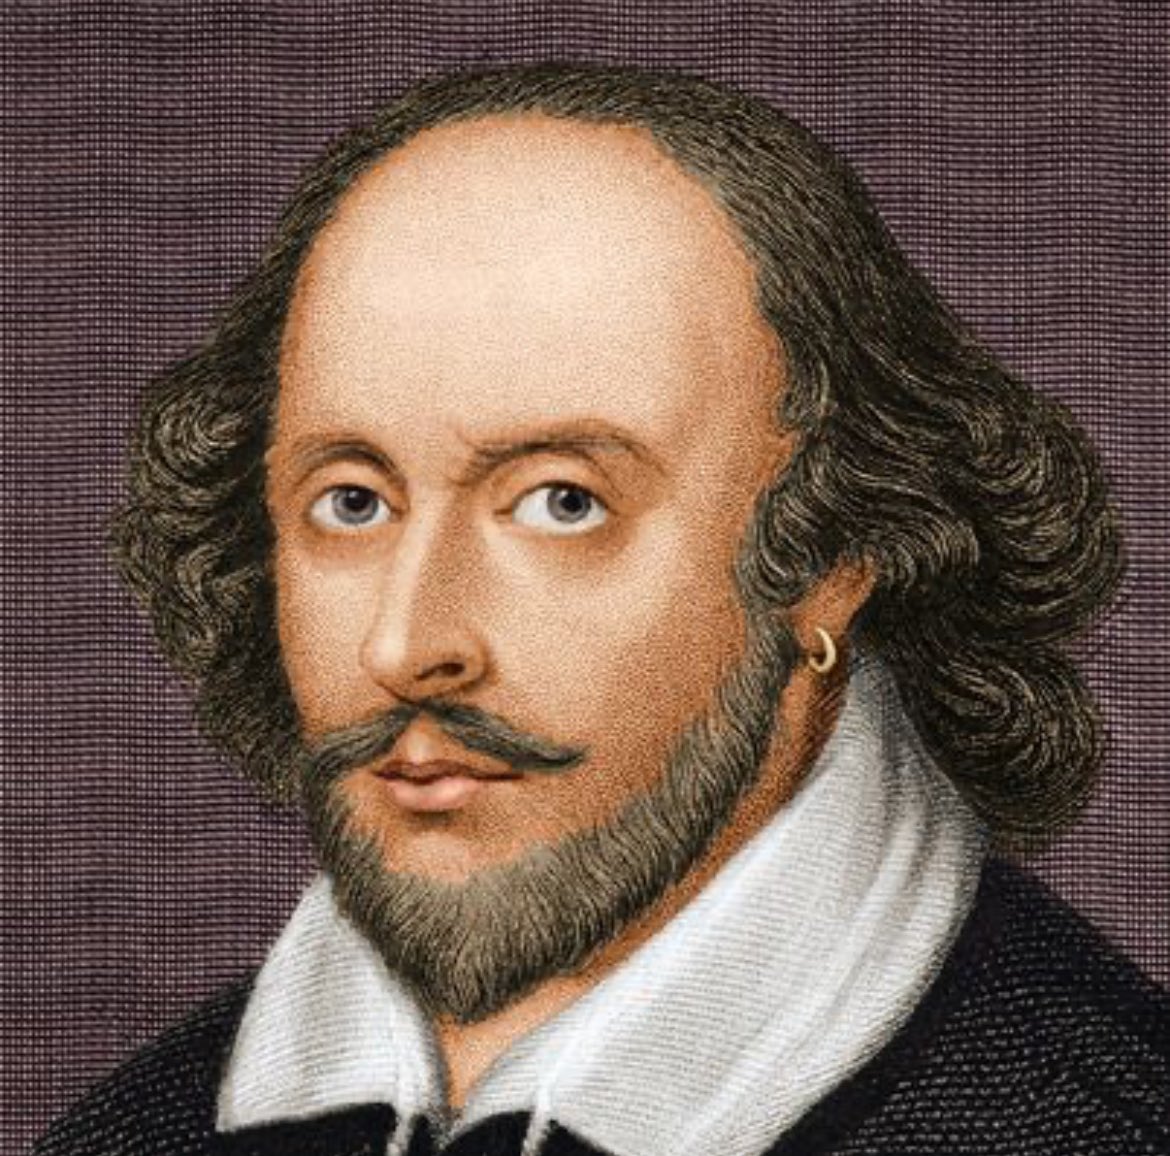 “This is the excellent foppery of the world, that when we are sick in fortune (often the surfeits of our own behaviour) we make guilty of our disasters the sun, the moon, and stars, as if we were villains on necessity; fools by heavenly compulsion.” Shakespeare